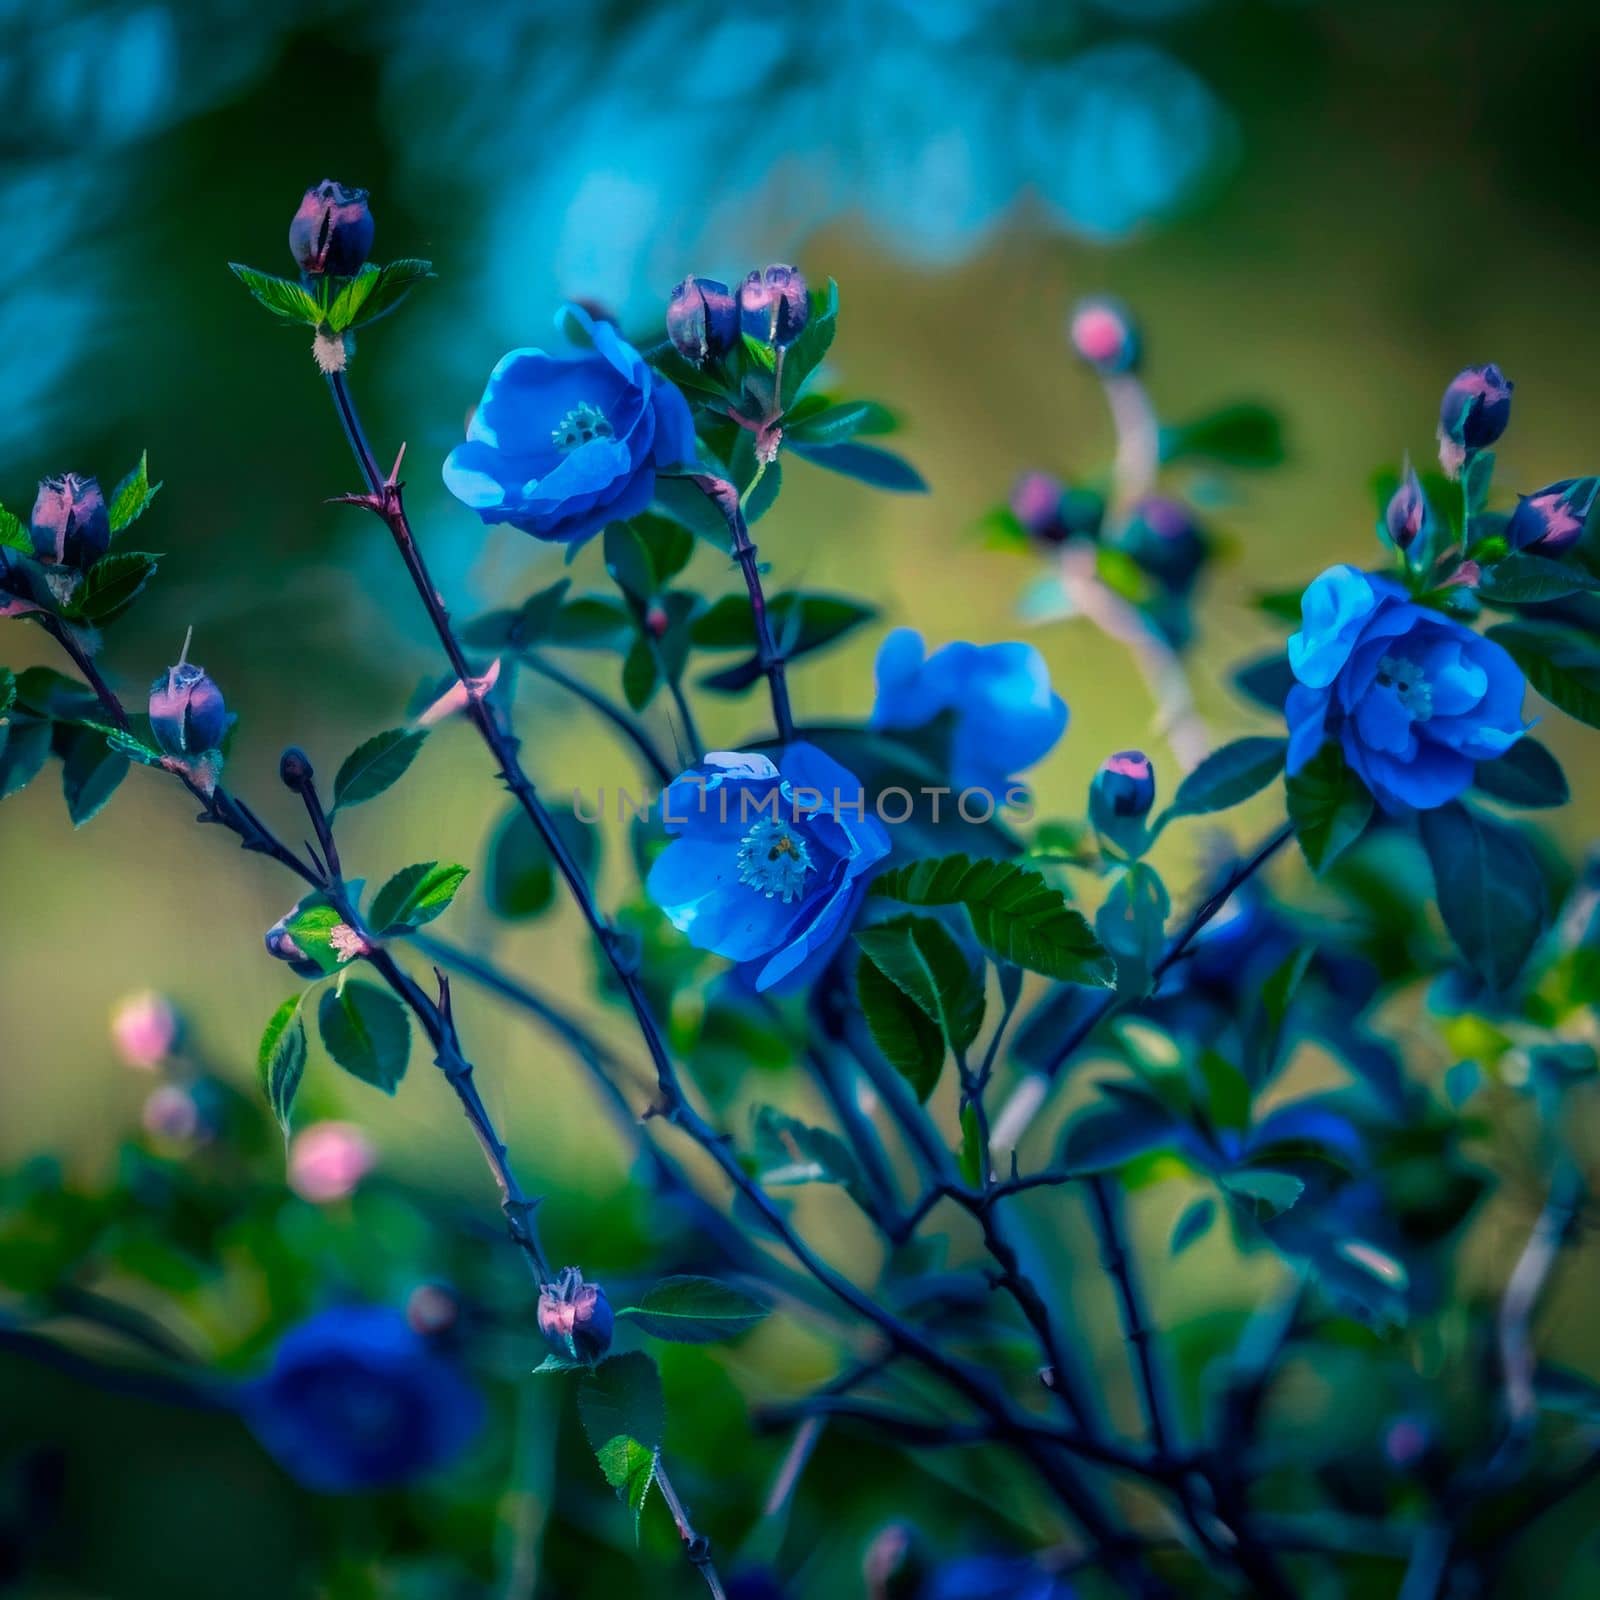 Wild rose with blue buds by NeuroSky